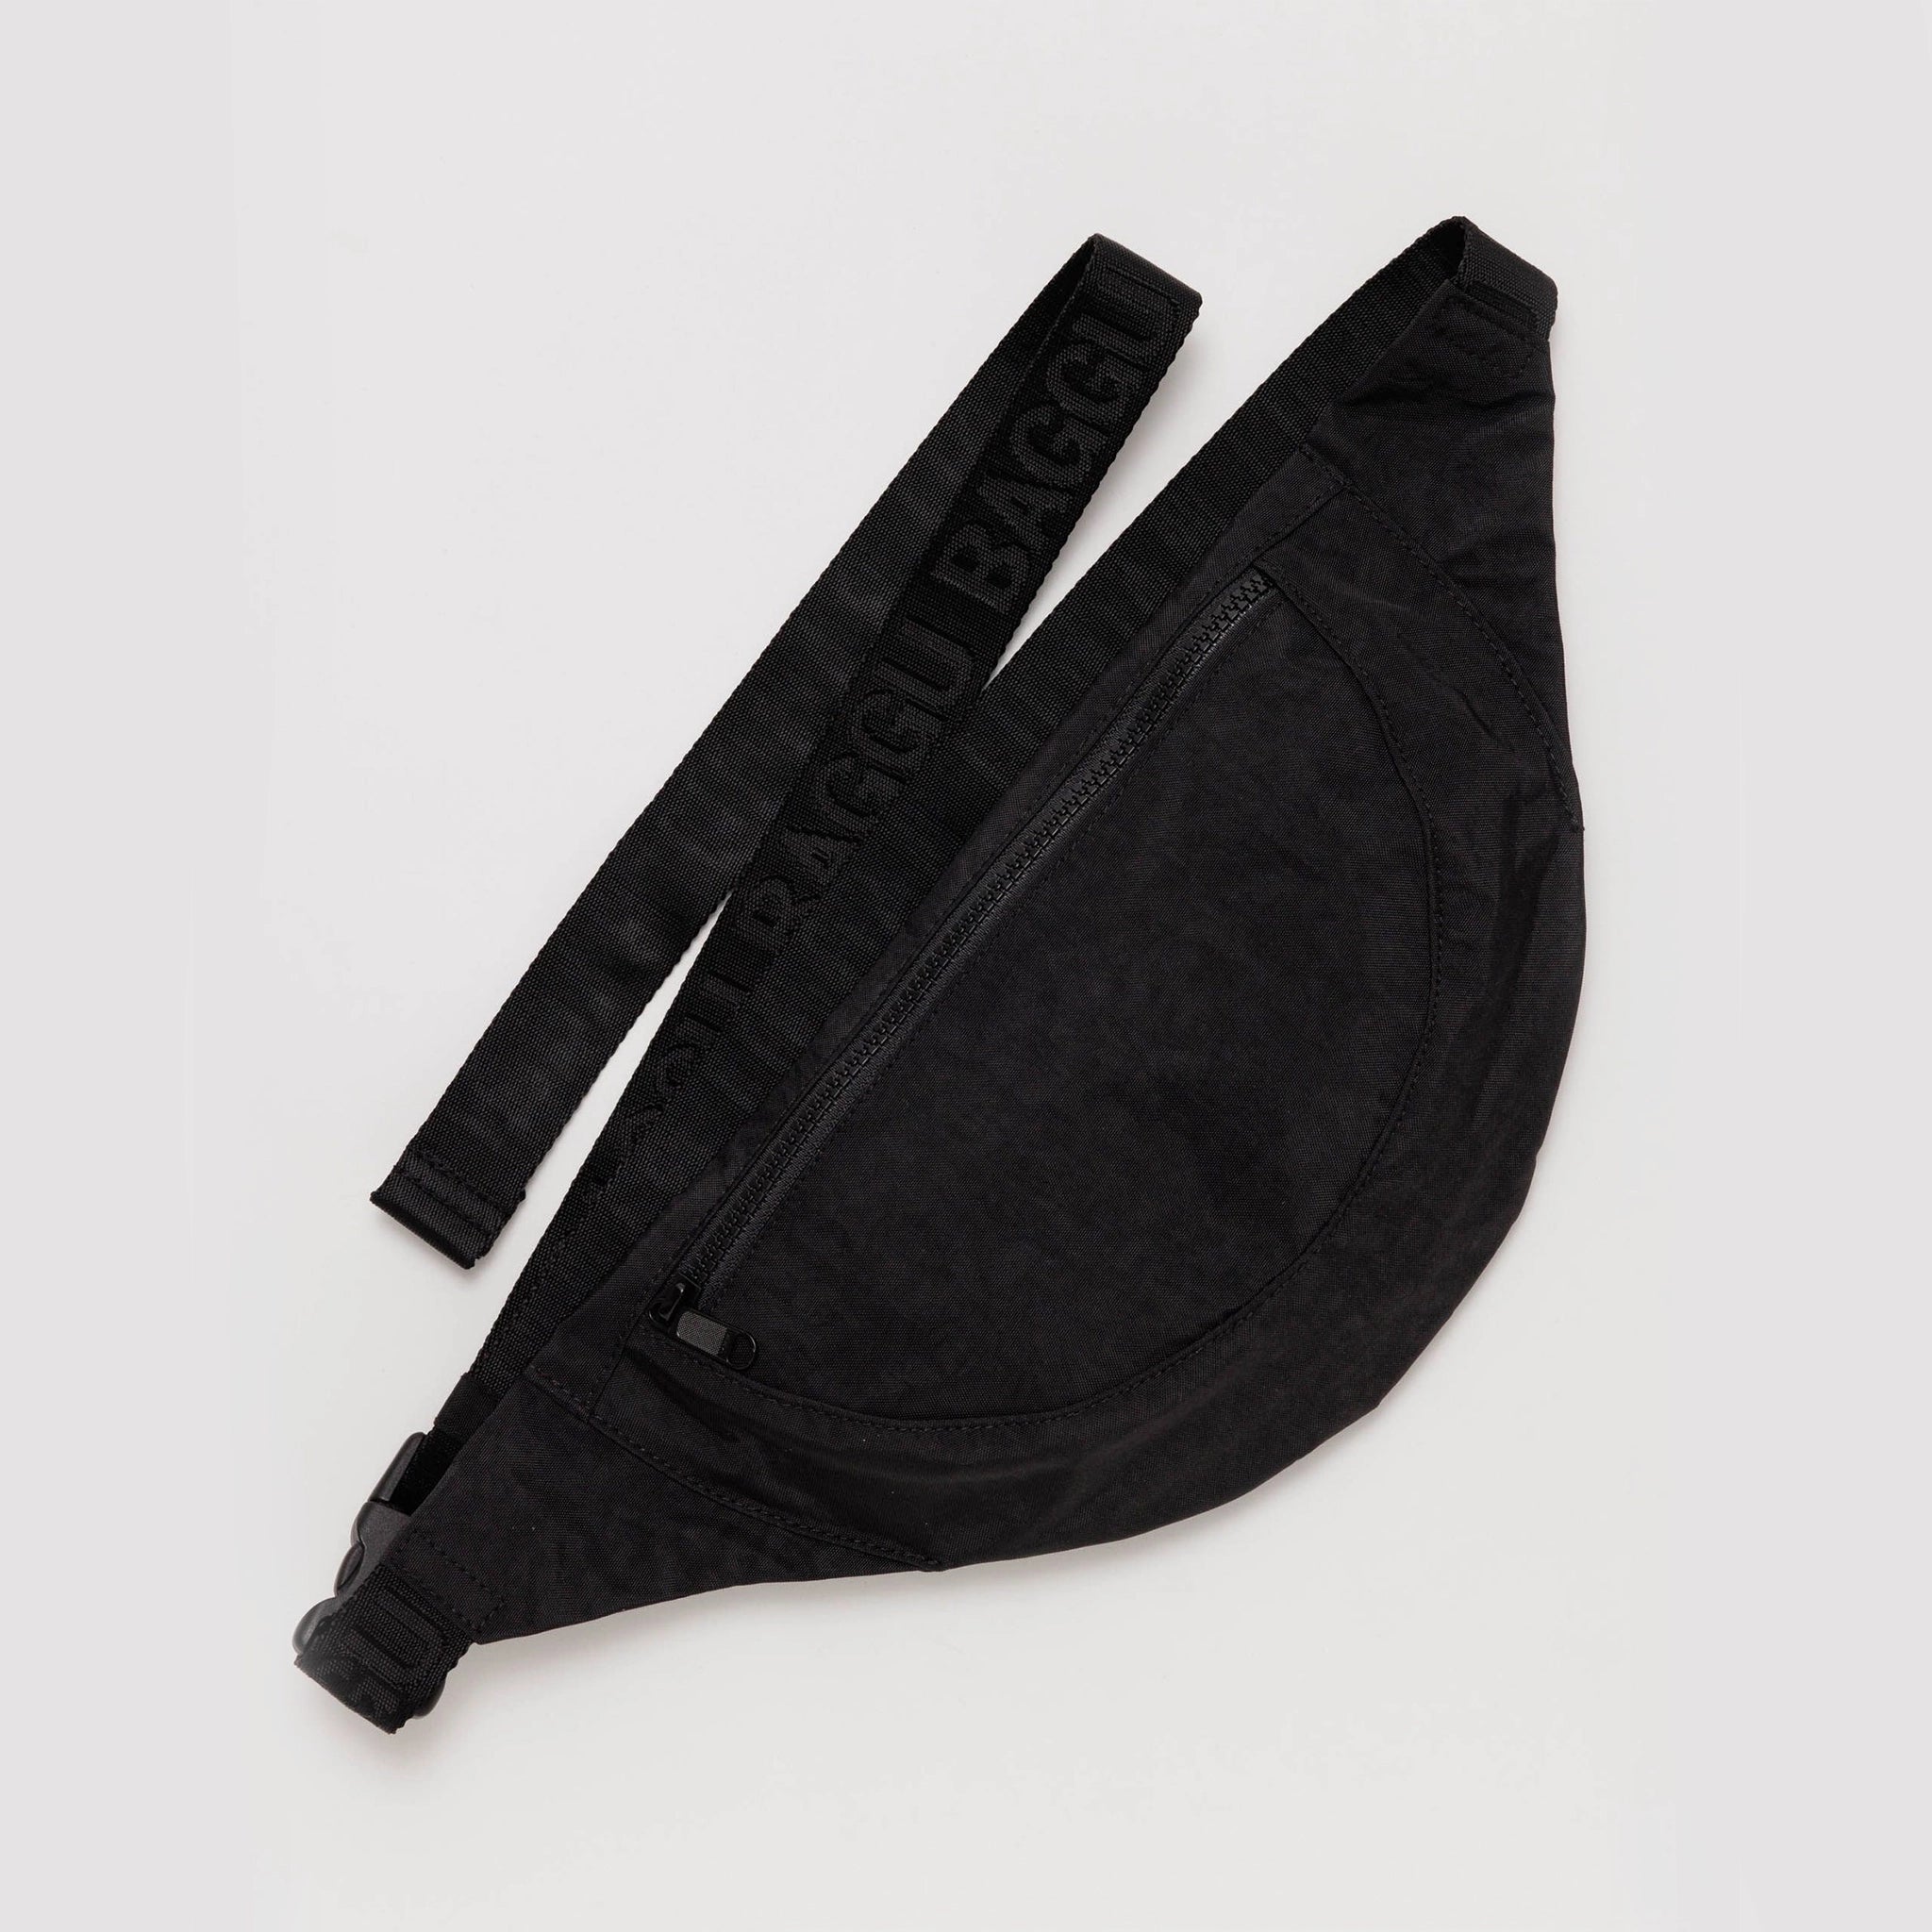 On a white background is a black fanny pack with a front pocket with a black adjustable strap. 